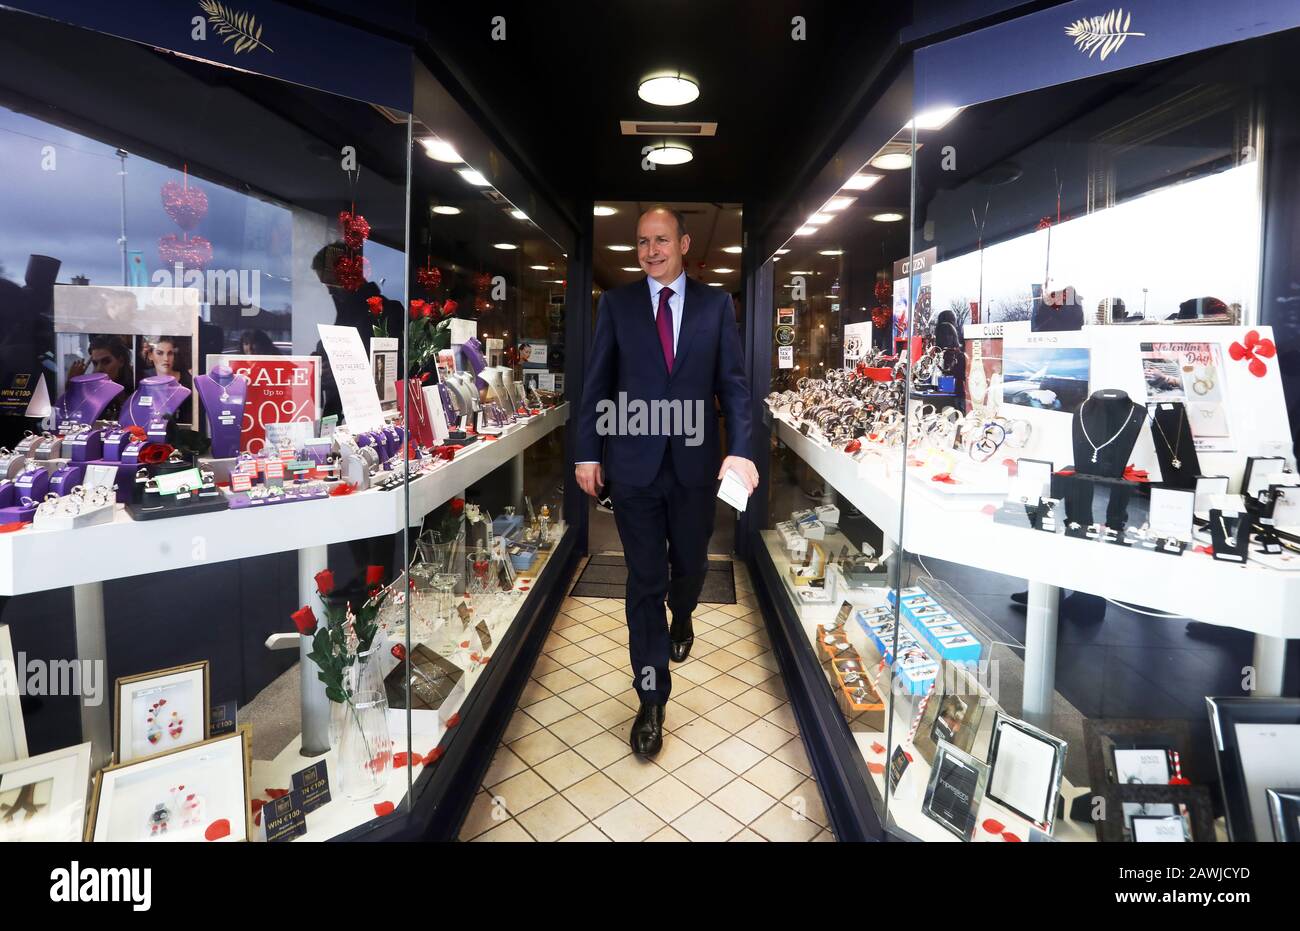 Dublin, Ireland. 31/1/2020 Fianna Fail General Election 2020 Pictured is Fianna Fail party leader Micheal Martin leaving a jewellery shop as he canvassed in Rathfarnham shopping centre this morning. Photo: Leah Farrell / RollingNews.ie Stock Photo